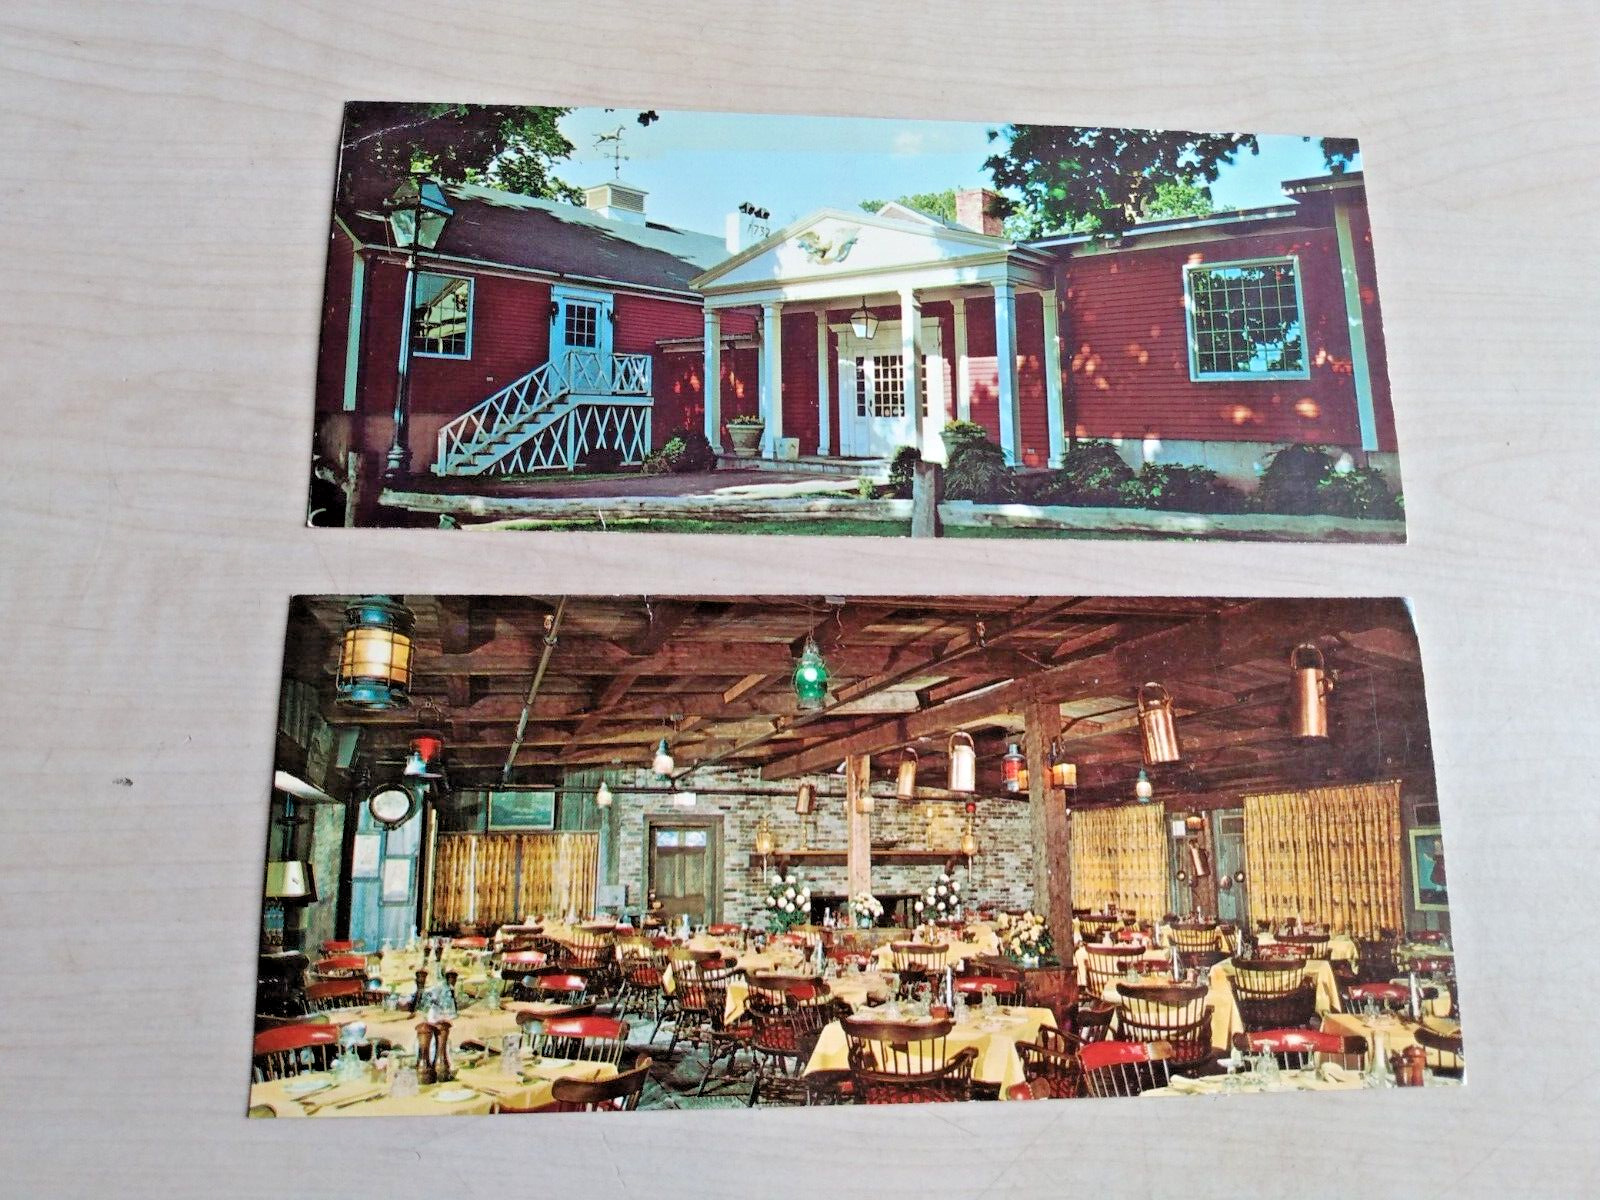 Two General Glover House Restaurant, Swampscott, Ma. Extra Long Postcard